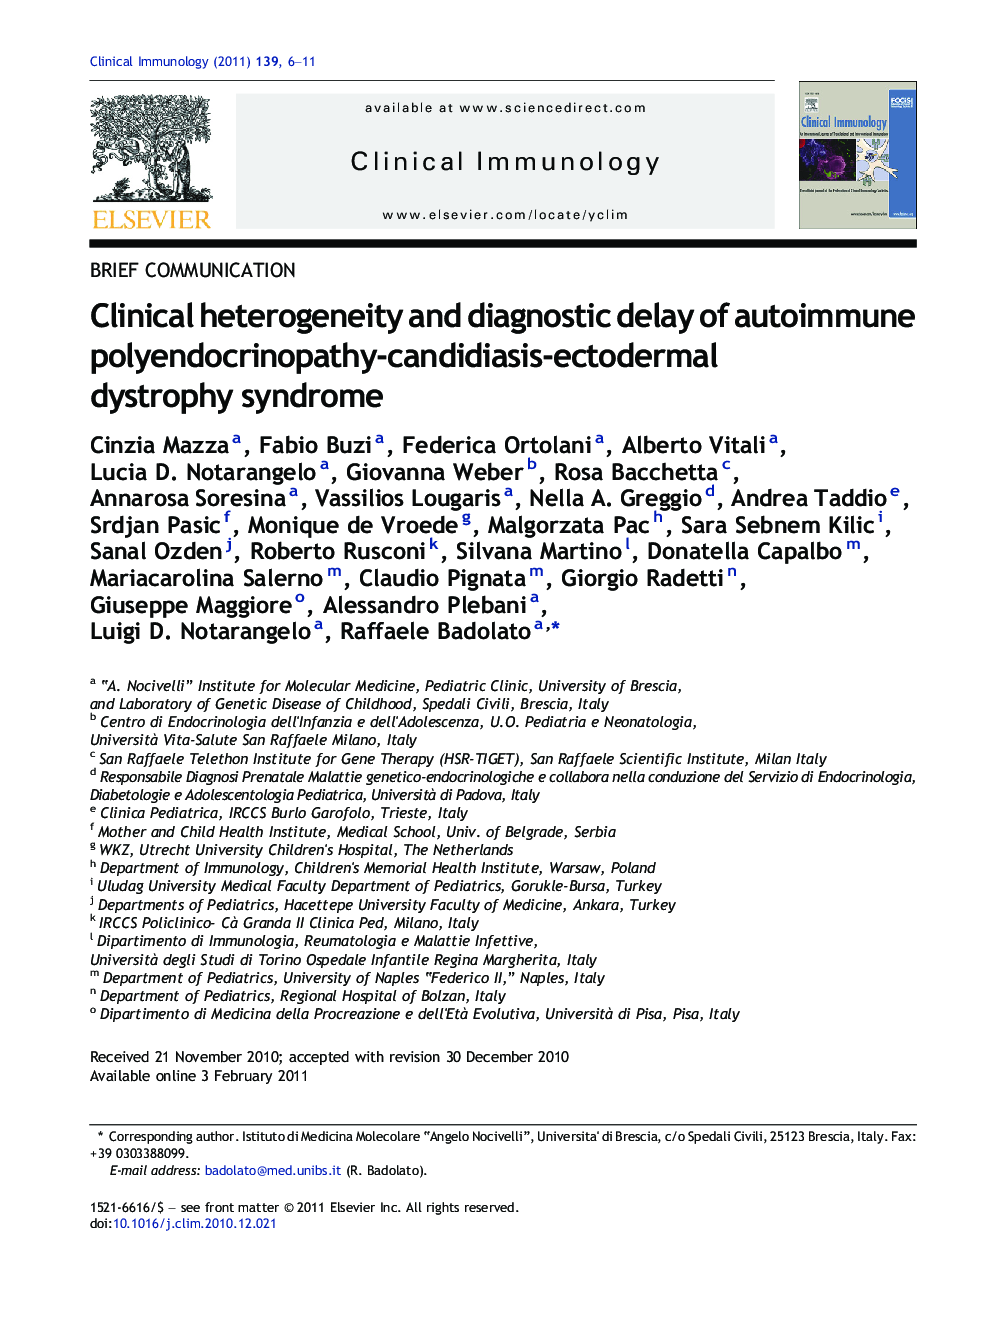 Brief CommunicationClinical heterogeneity and diagnostic delay of autoimmune polyendocrinopathy-candidiasis-ectodermal dystrophy syndrome